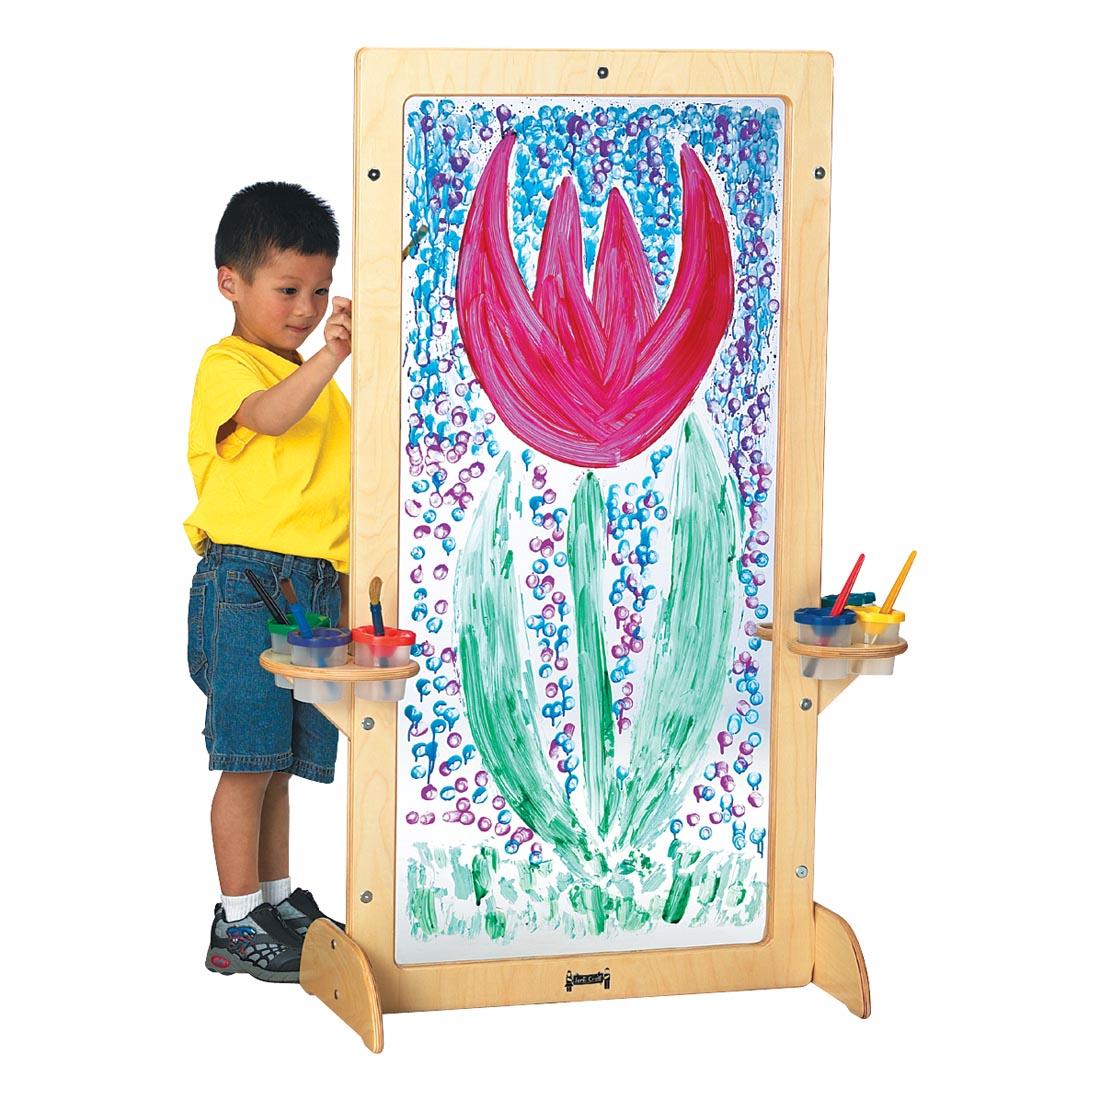 Child painting on the See-Thru Easel